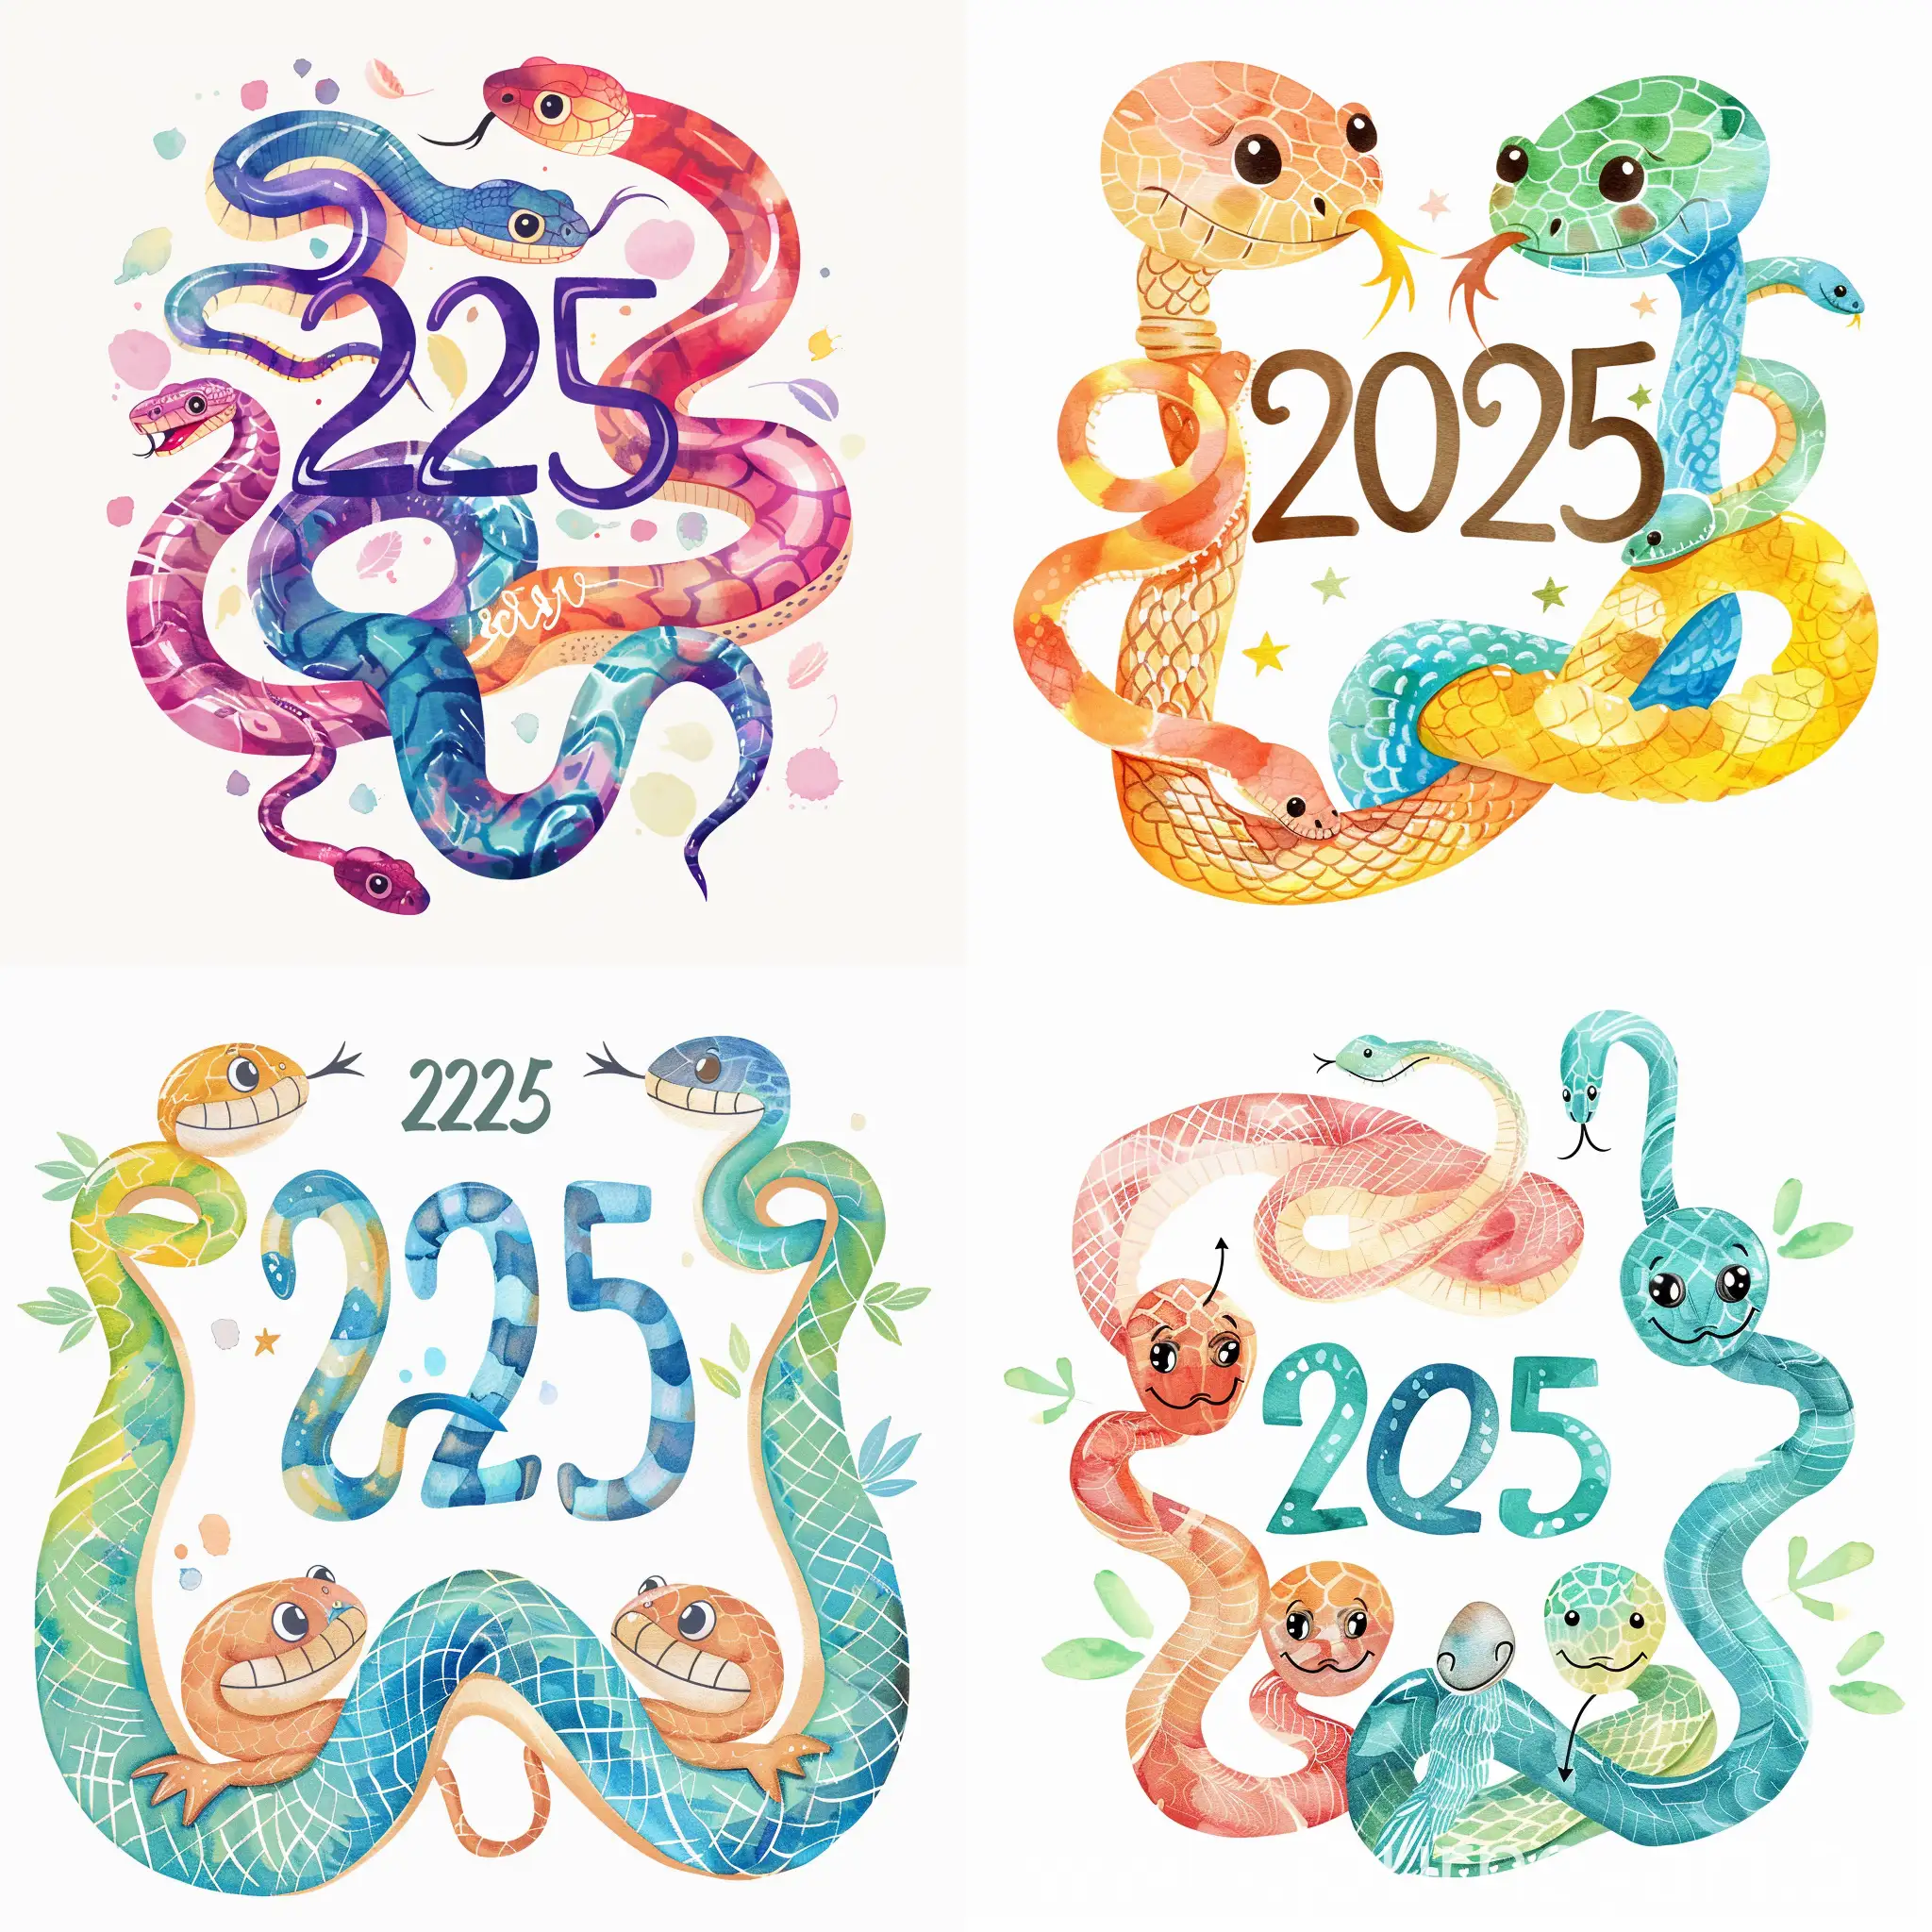 Colorful-Watercolor-Logo-Inscription-2025-with-Adorable-Cartoon-Snakes-on-White-Background